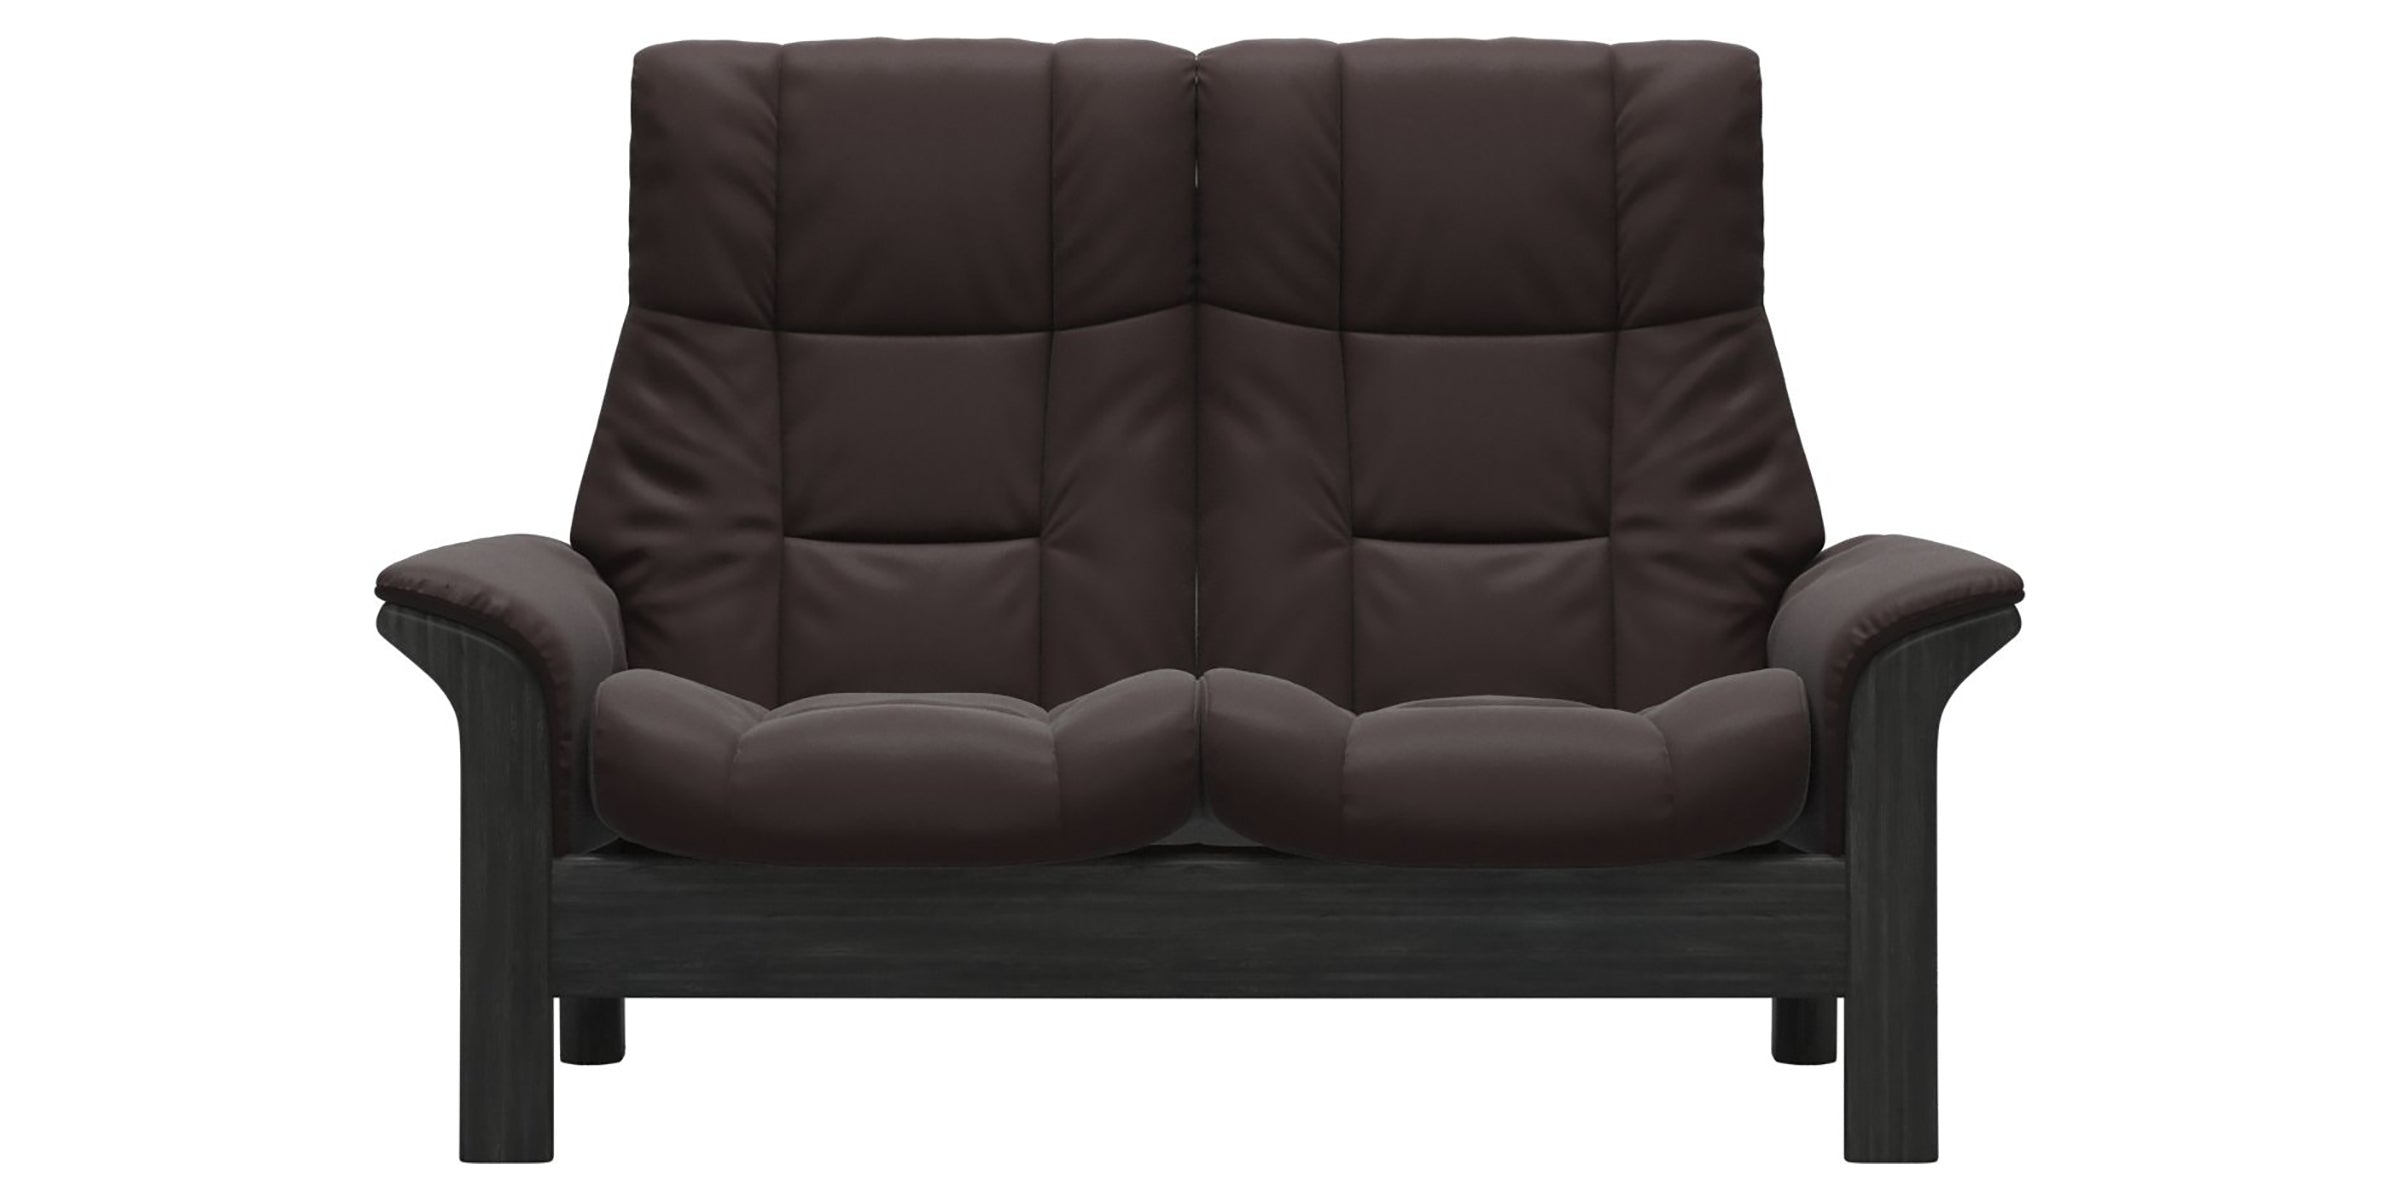 Paloma Leather Chocolate and Grey Base | Stressless Windsor 2-Seater High Back Sofa | Valley Ridge Furniture